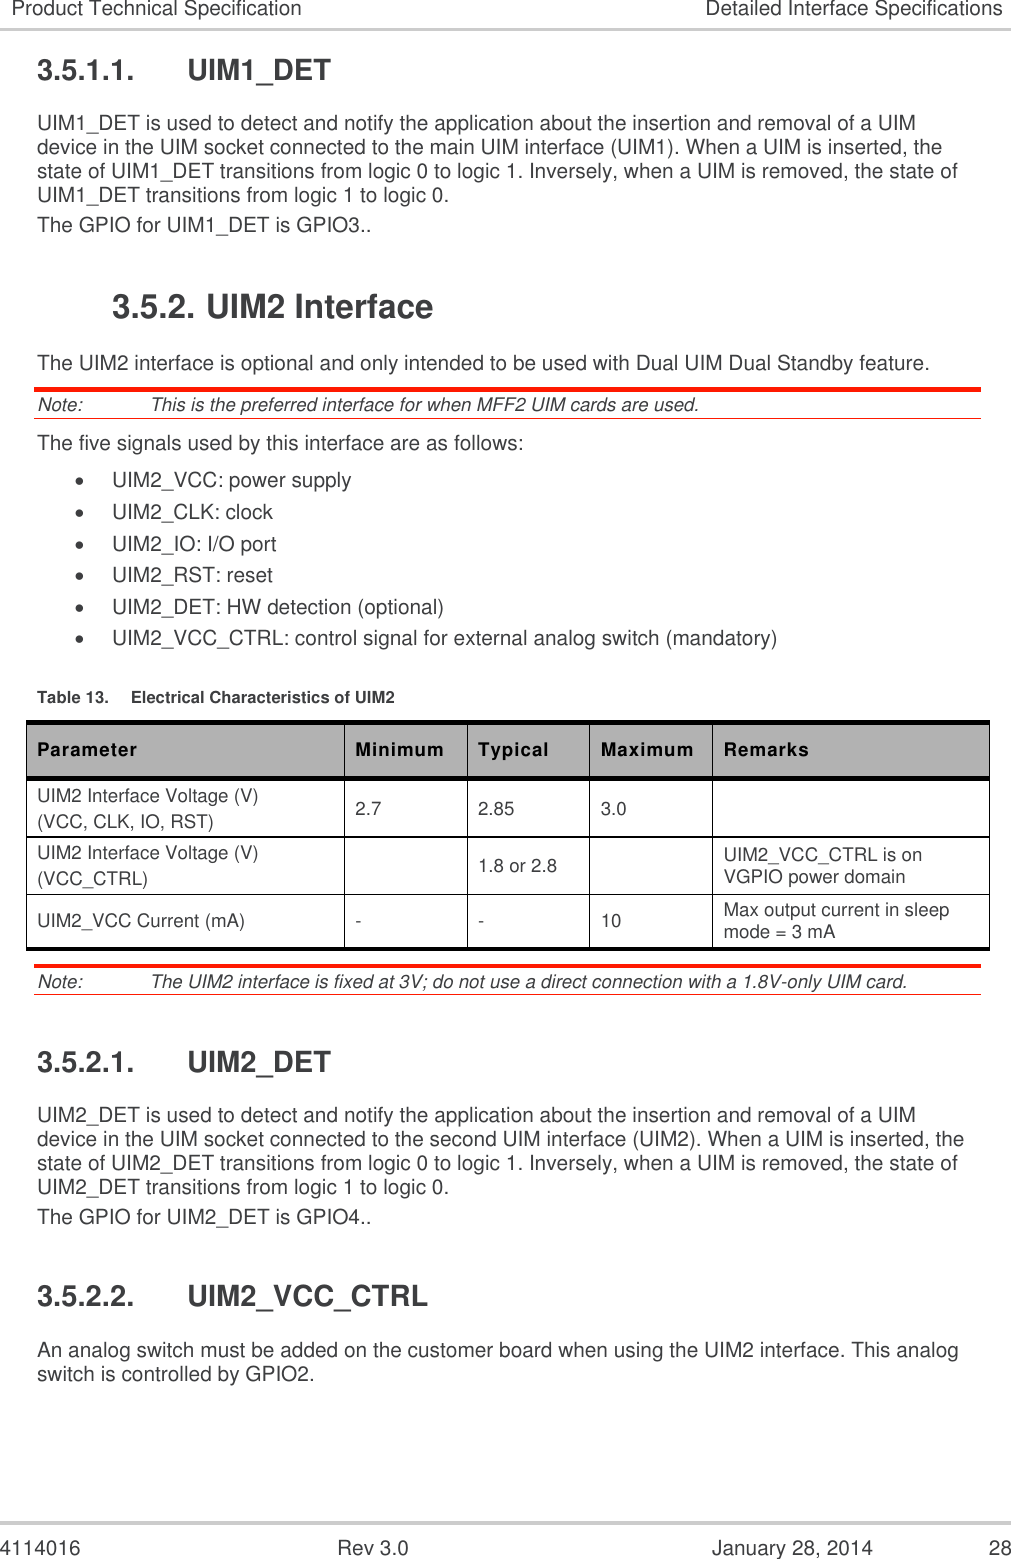  4114016  Rev 3.0  January 28, 2014  28 Product Technical Specification Detailed Interface Specifications 3.5.1.1.  UIM1_DET UIM1_DET is used to detect and notify the application about the insertion and removal of a UIM device in the UIM socket connected to the main UIM interface (UIM1). When a UIM is inserted, the state of UIM1_DET transitions from logic 0 to logic 1. Inversely, when a UIM is removed, the state of UIM1_DET transitions from logic 1 to logic 0. The GPIO for UIM1_DET is GPIO3.. 3.5.2. UIM2 Interface The UIM2 interface is optional and only intended to be used with Dual UIM Dual Standby feature. Note:   This is the preferred interface for when MFF2 UIM cards are used. The five signals used by this interface are as follows:  UIM2_VCC: power supply  UIM2_CLK: clock  UIM2_IO: I/O port  UIM2_RST: reset  UIM2_DET: HW detection (optional)  UIM2_VCC_CTRL: control signal for external analog switch (mandatory) Table 13.  Electrical Characteristics of UIM2 Parameter Minimum Typical Maximum Remarks UIM2 Interface Voltage (V) (VCC, CLK, IO, RST) 2.7 2.85 3.0  UIM2 Interface Voltage (V) (VCC_CTRL)  1.8 or 2.8  UIM2_VCC_CTRL is on VGPIO power domain UIM2_VCC Current (mA) - - 10 Max output current in sleep mode = 3 mA Note:   The UIM2 interface is fixed at 3V; do not use a direct connection with a 1.8V-only UIM card. 3.5.2.1.  UIM2_DET UIM2_DET is used to detect and notify the application about the insertion and removal of a UIM device in the UIM socket connected to the second UIM interface (UIM2). When a UIM is inserted, the state of UIM2_DET transitions from logic 0 to logic 1. Inversely, when a UIM is removed, the state of UIM2_DET transitions from logic 1 to logic 0. The GPIO for UIM2_DET is GPIO4.. 3.5.2.2.  UIM2_VCC_CTRL An analog switch must be added on the customer board when using the UIM2 interface. This analog switch is controlled by GPIO2. 